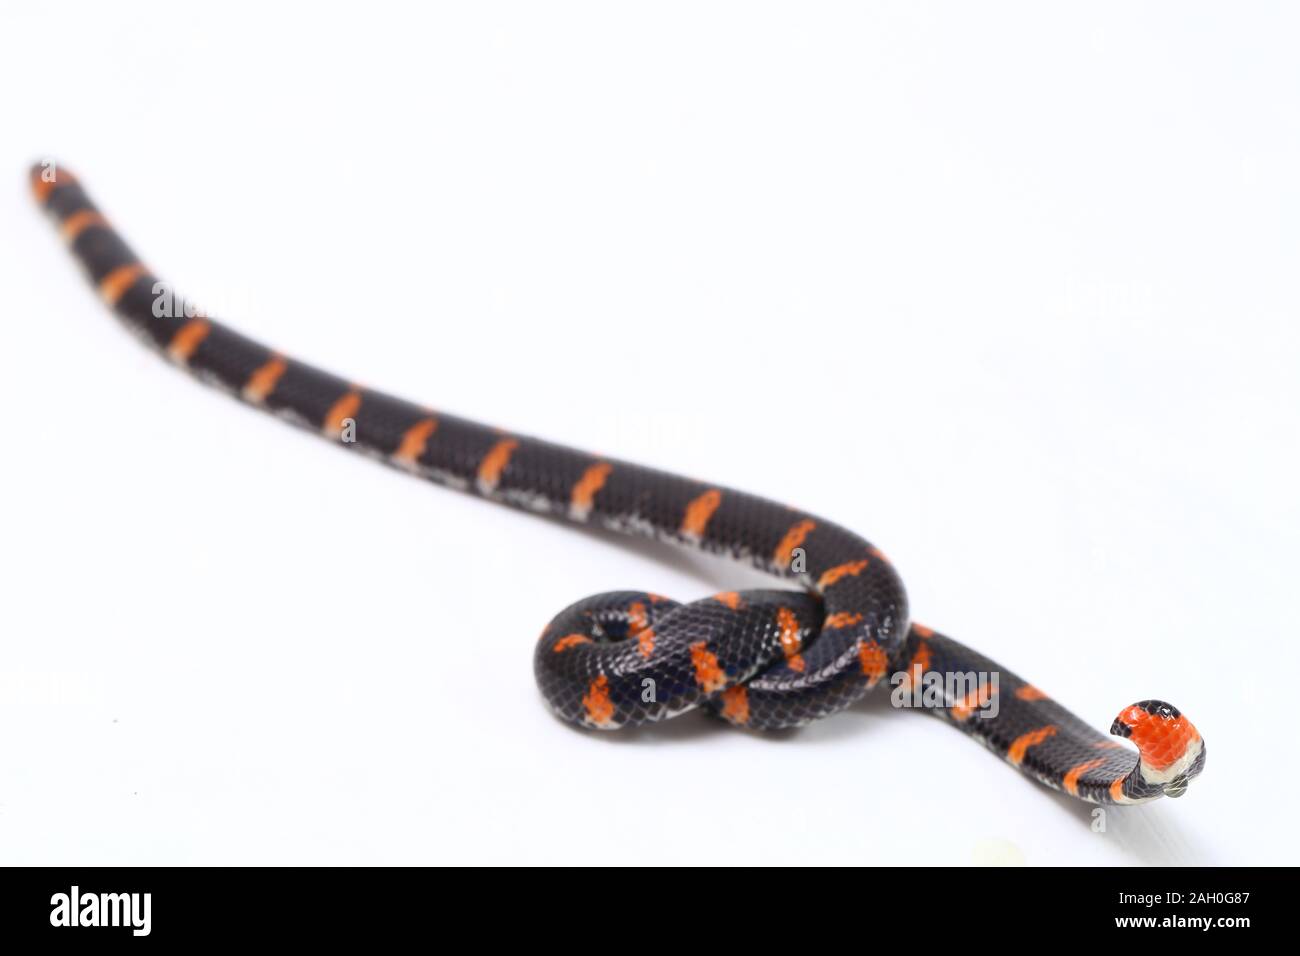 https://c8.alamy.com/comp/2AH0G87/red-tailed-pipe-snake-scientific-name-cylindrophis-ruffus-isolate-on-white-background-2AH0G87.jpg